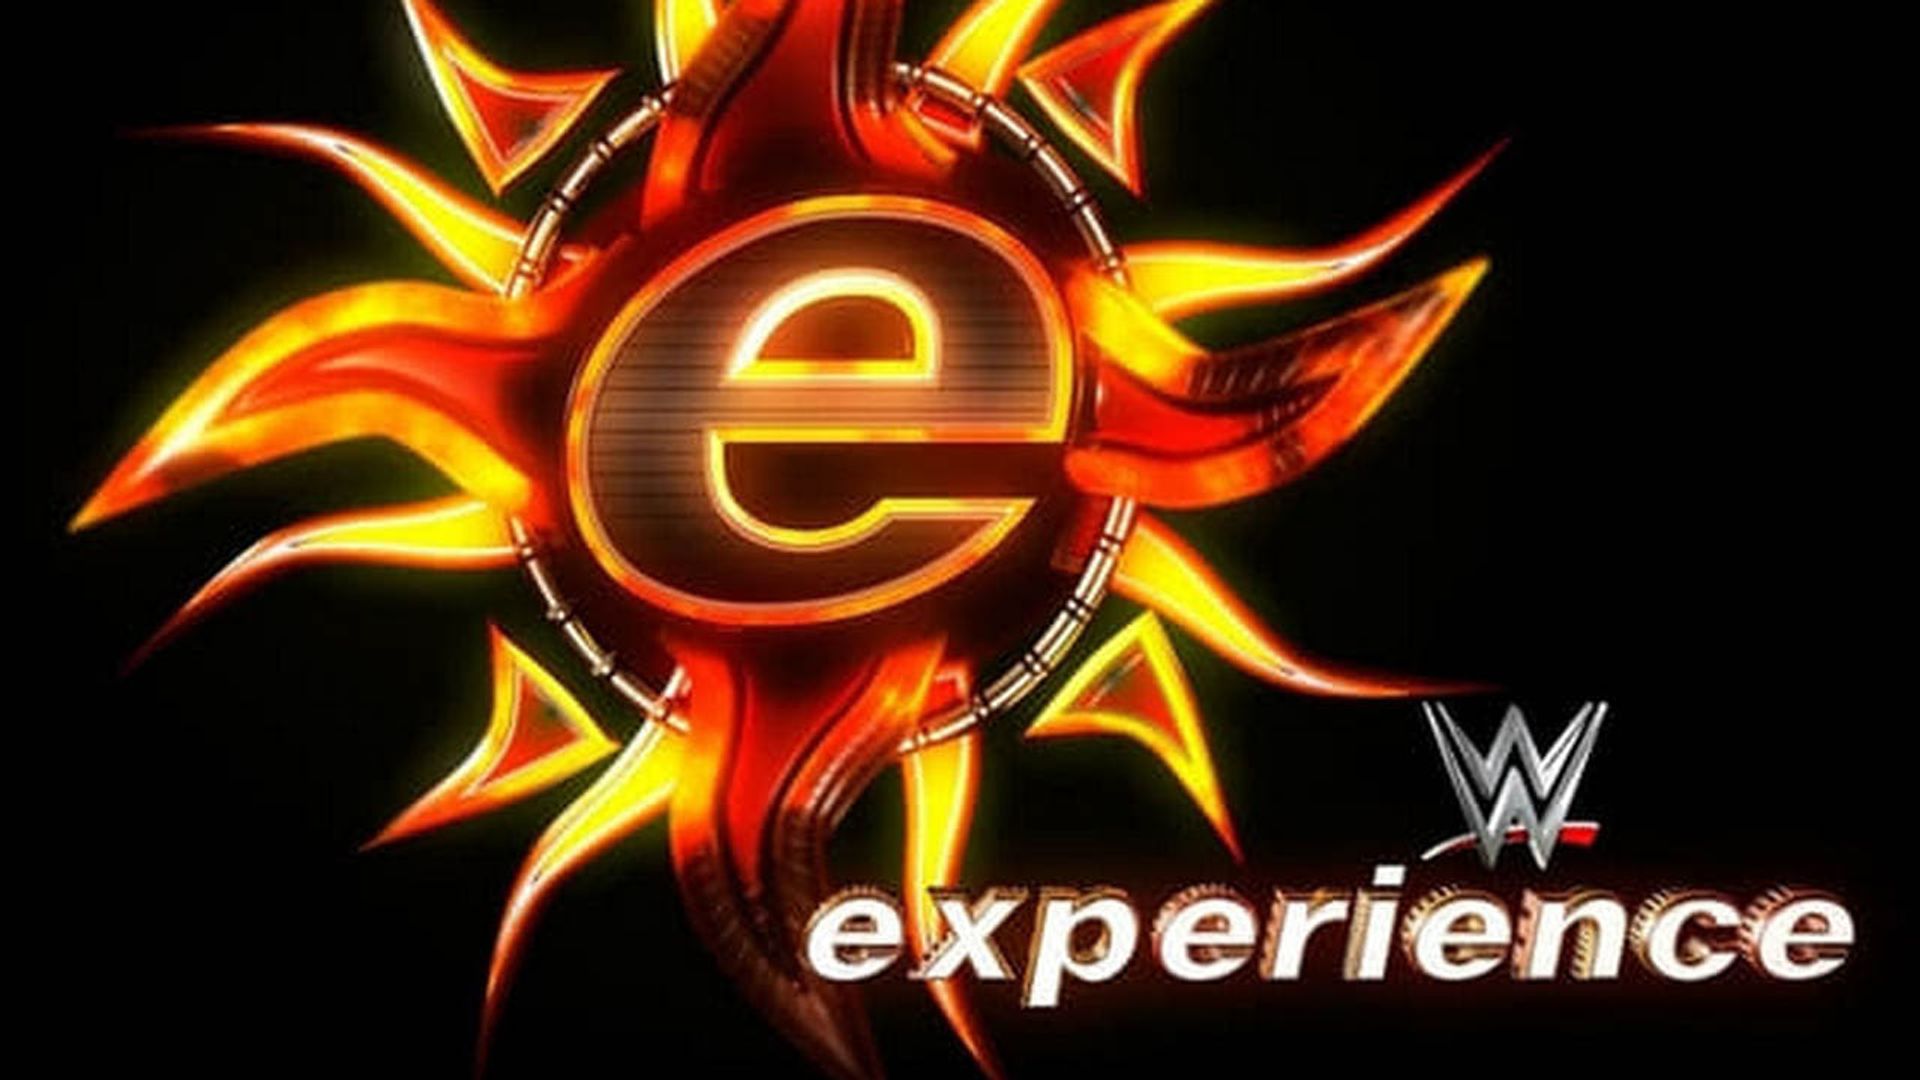 WWE Experience background